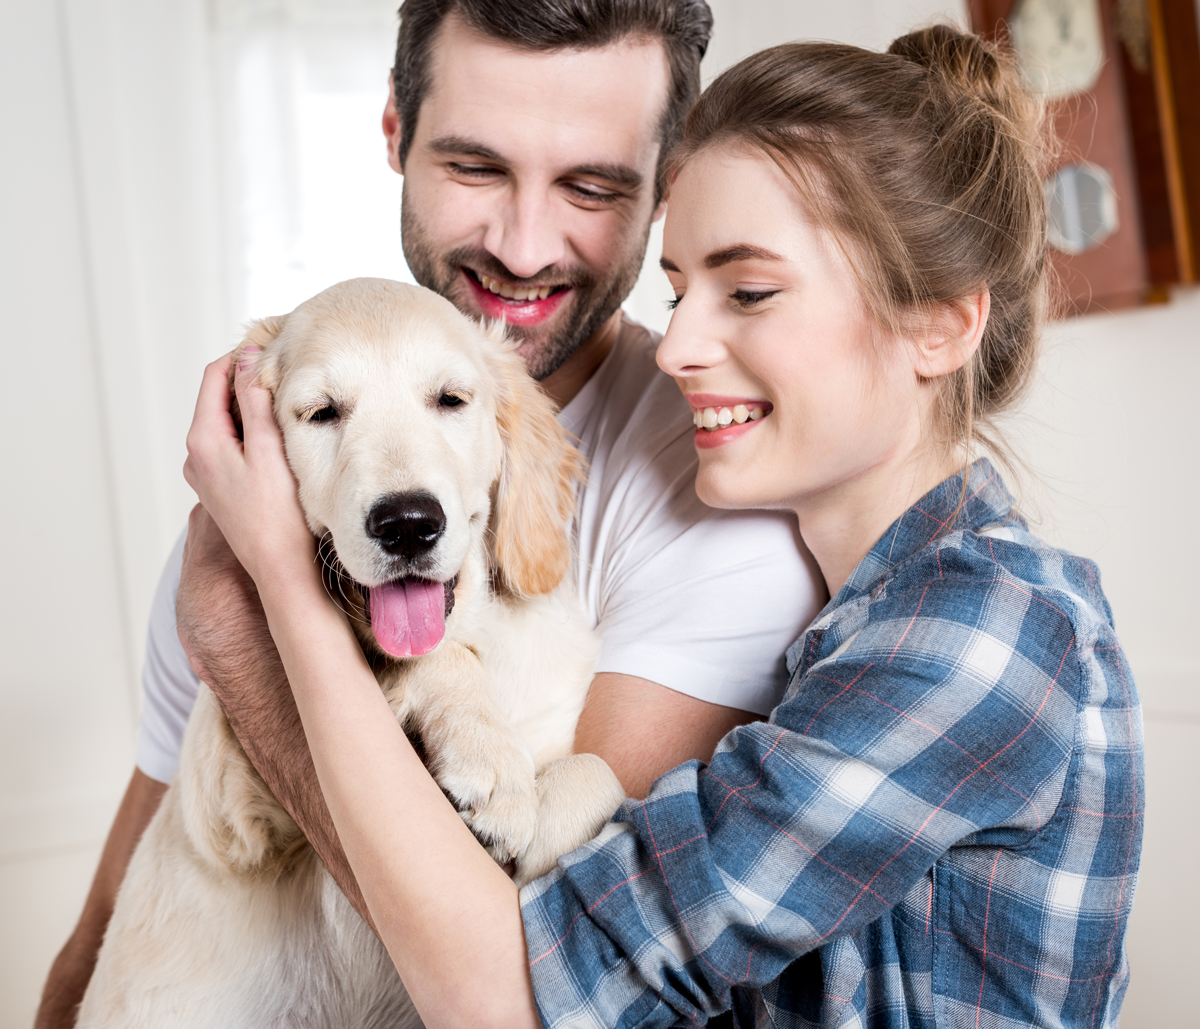 Pet Insurance: A Worthy Investment for Your Furry Friend